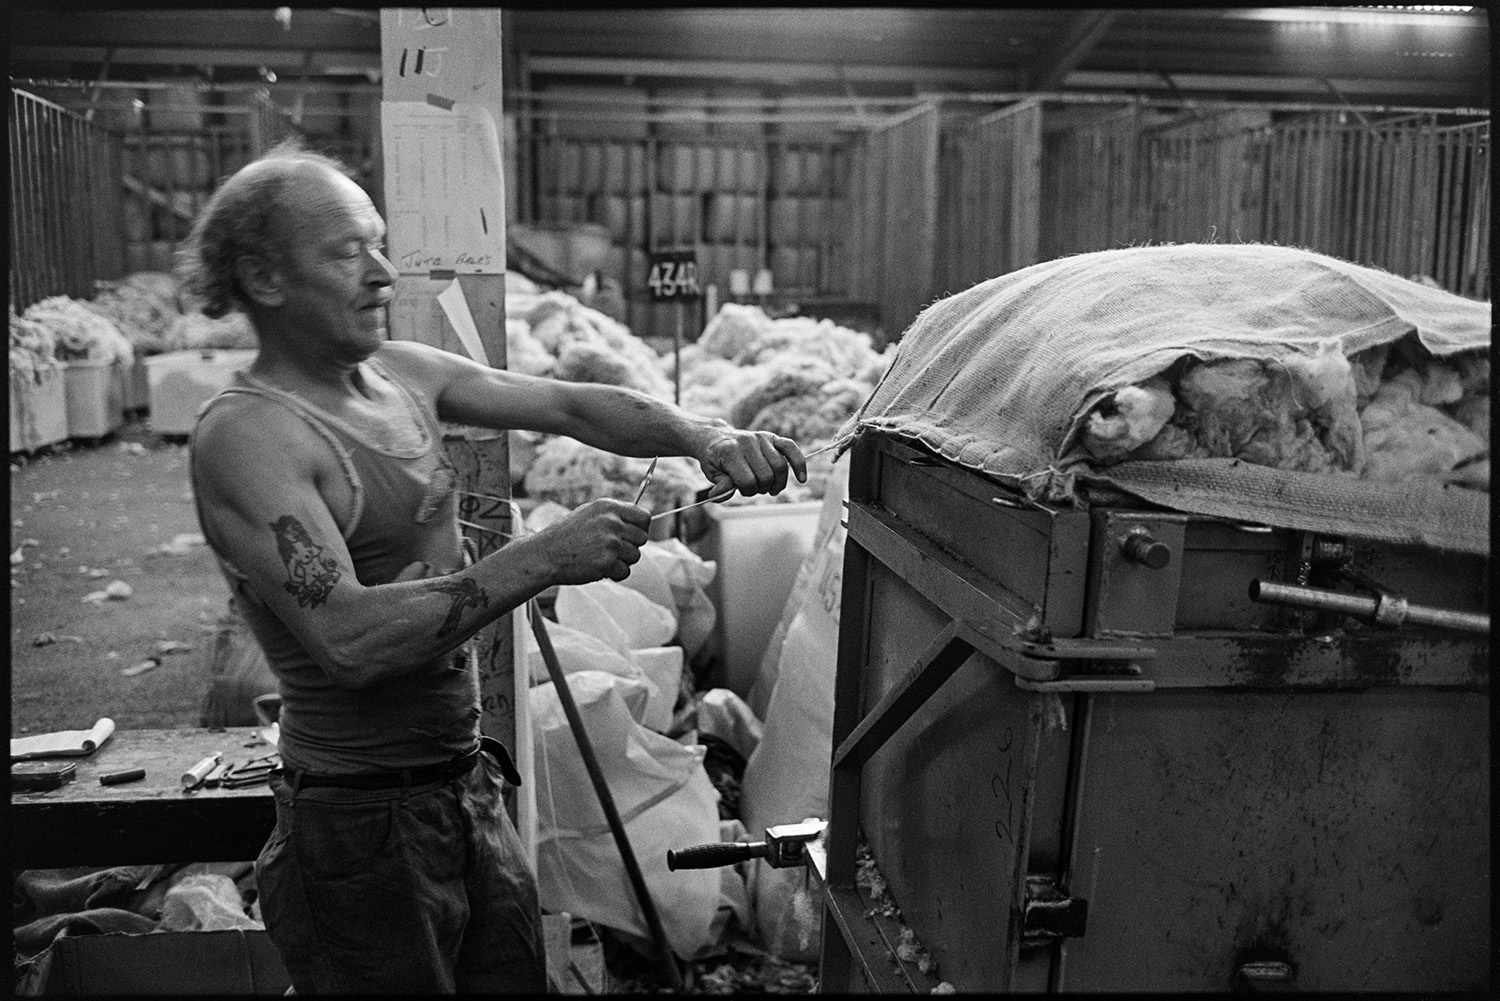 Sorting and packing wool, stacks of bales, office with paper work.
[A man with tattooed arms fixing a cover over the top of a container of wool in the warehouse of Devon & Cornwall Wools Ltd at the Pathfields Business Park in South Molton.]